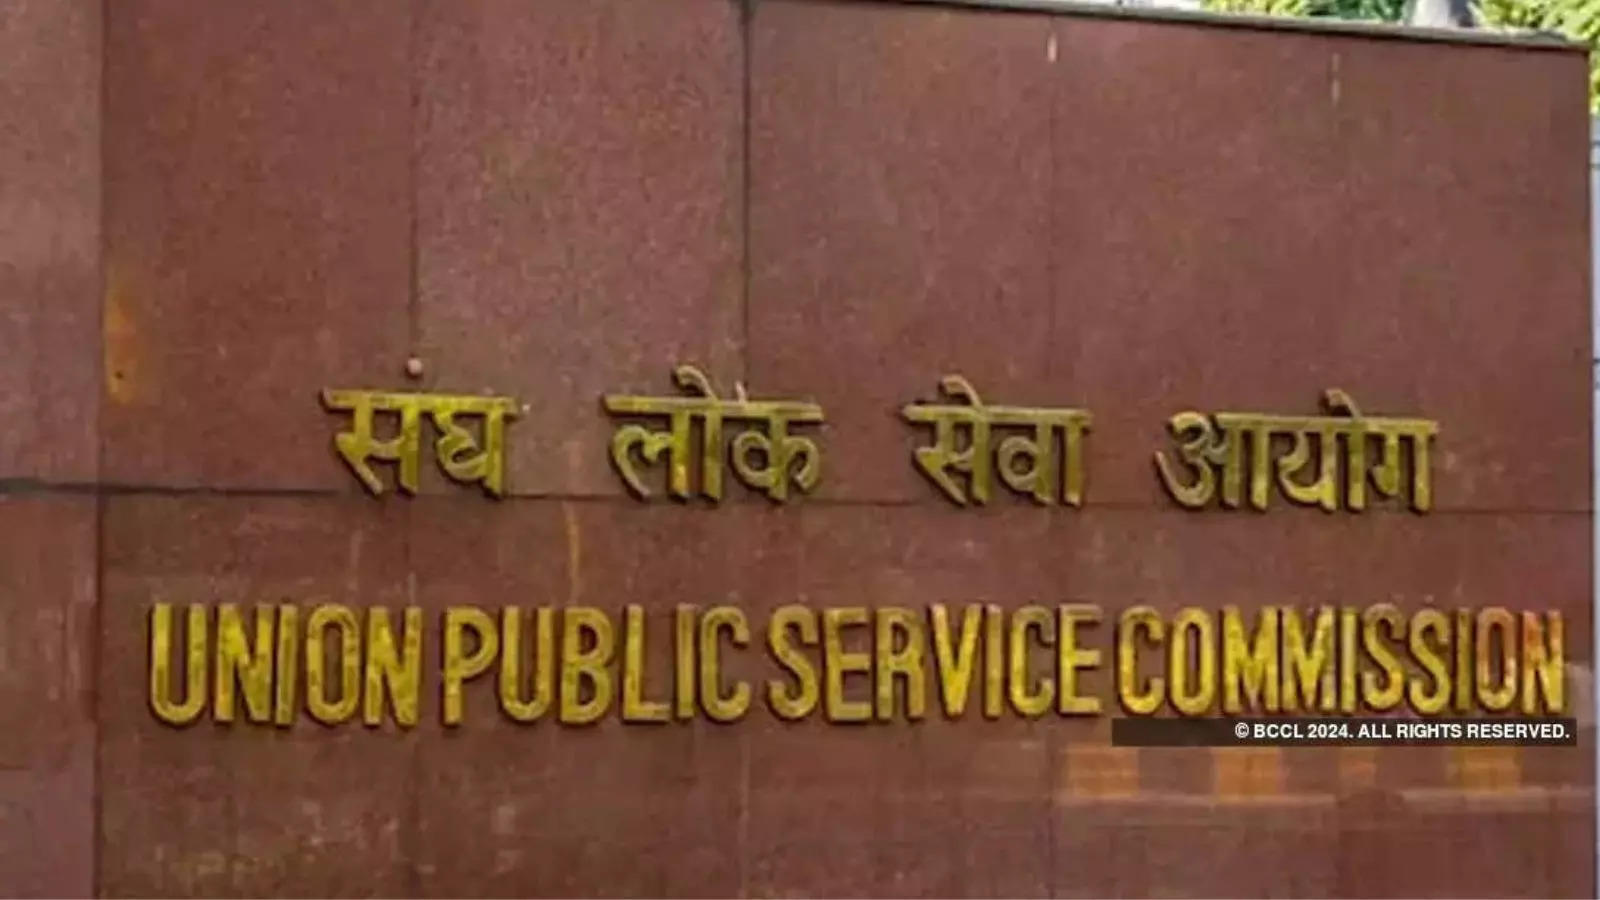 UPSC Jobs 2024: UPSC has released vacancies for 322 specialist posts, know where and how to apply.